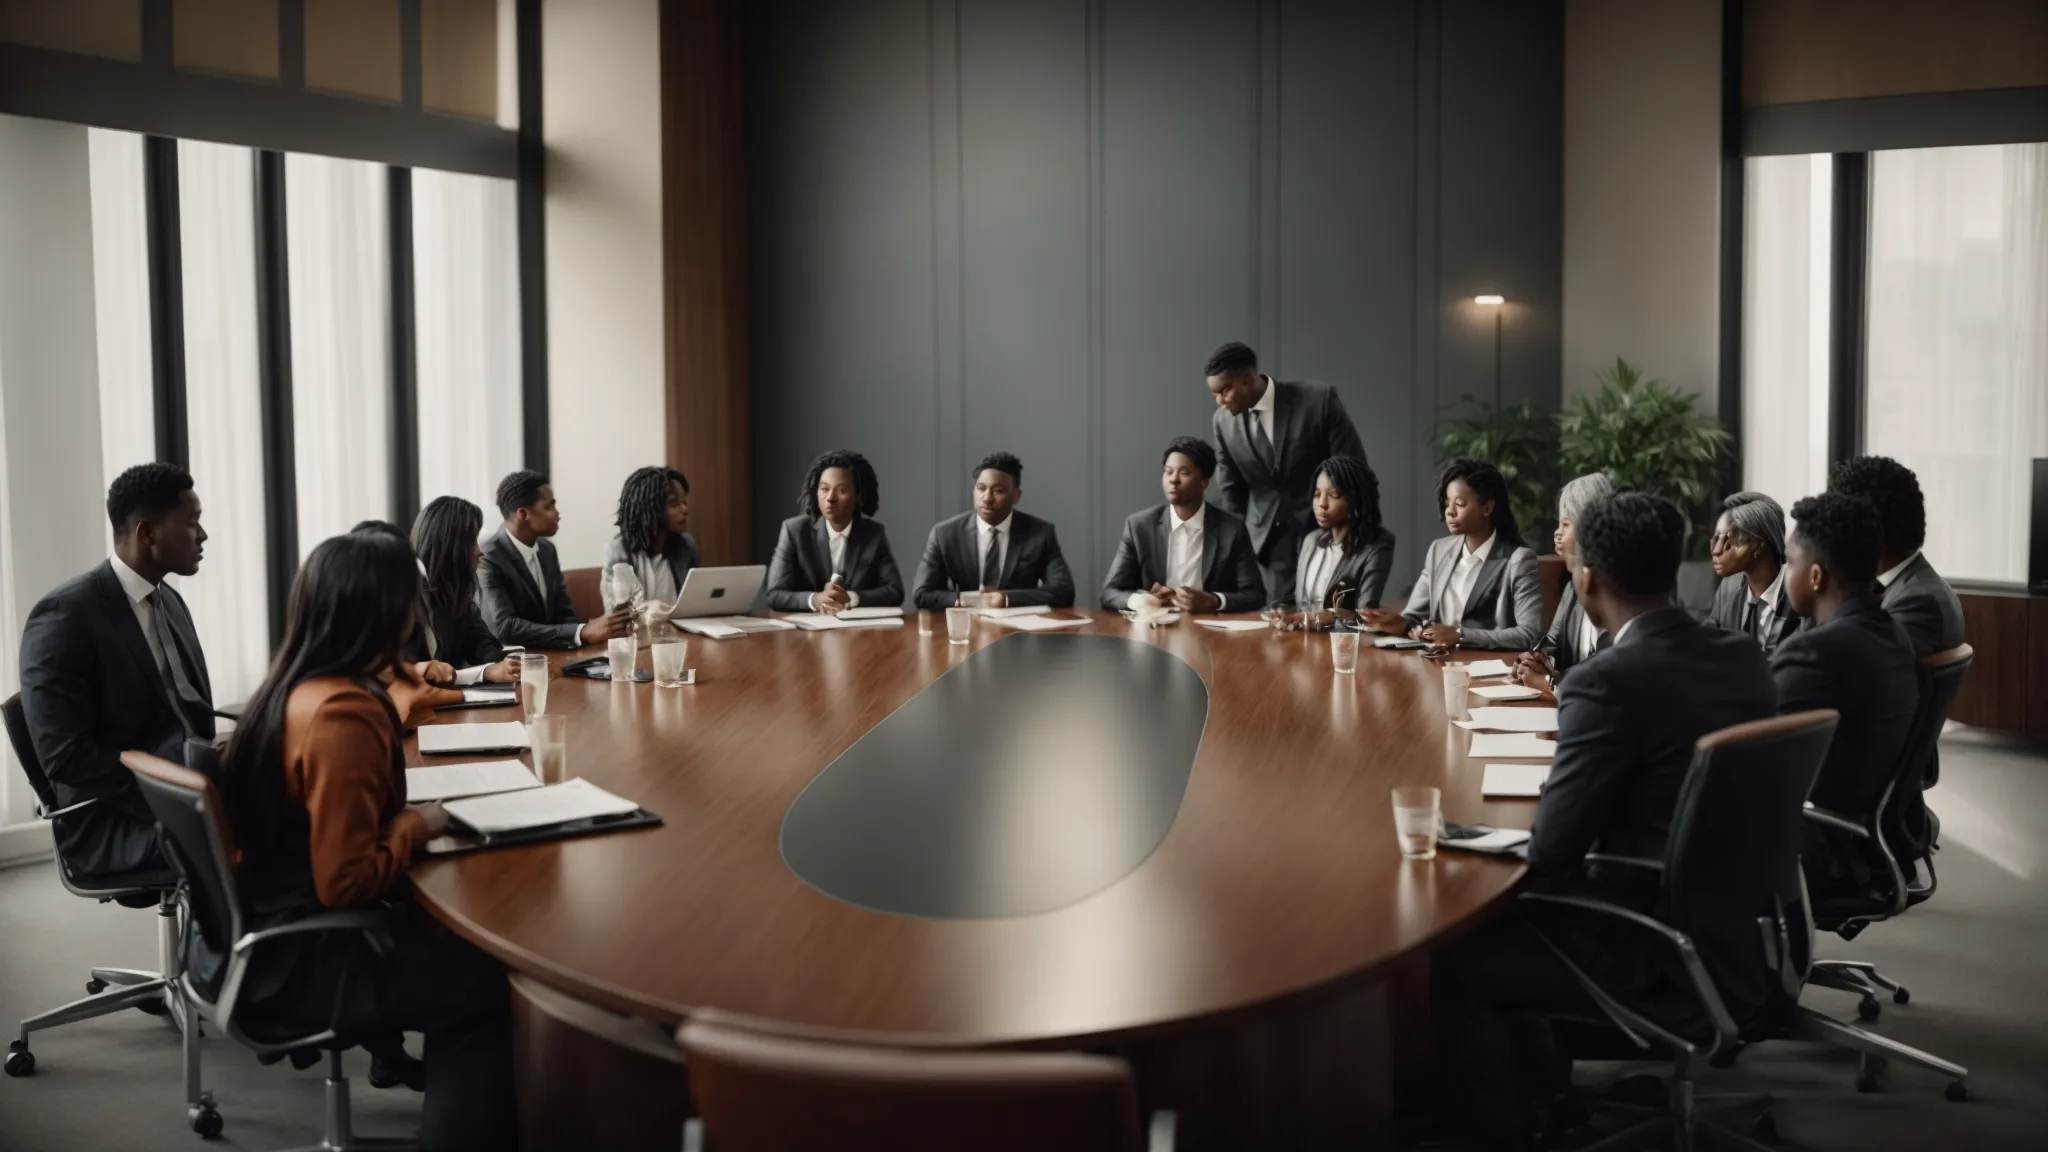 a diverse group of professionals sits around a large oval table, deeply engaged in discussion within an elegant conference room.